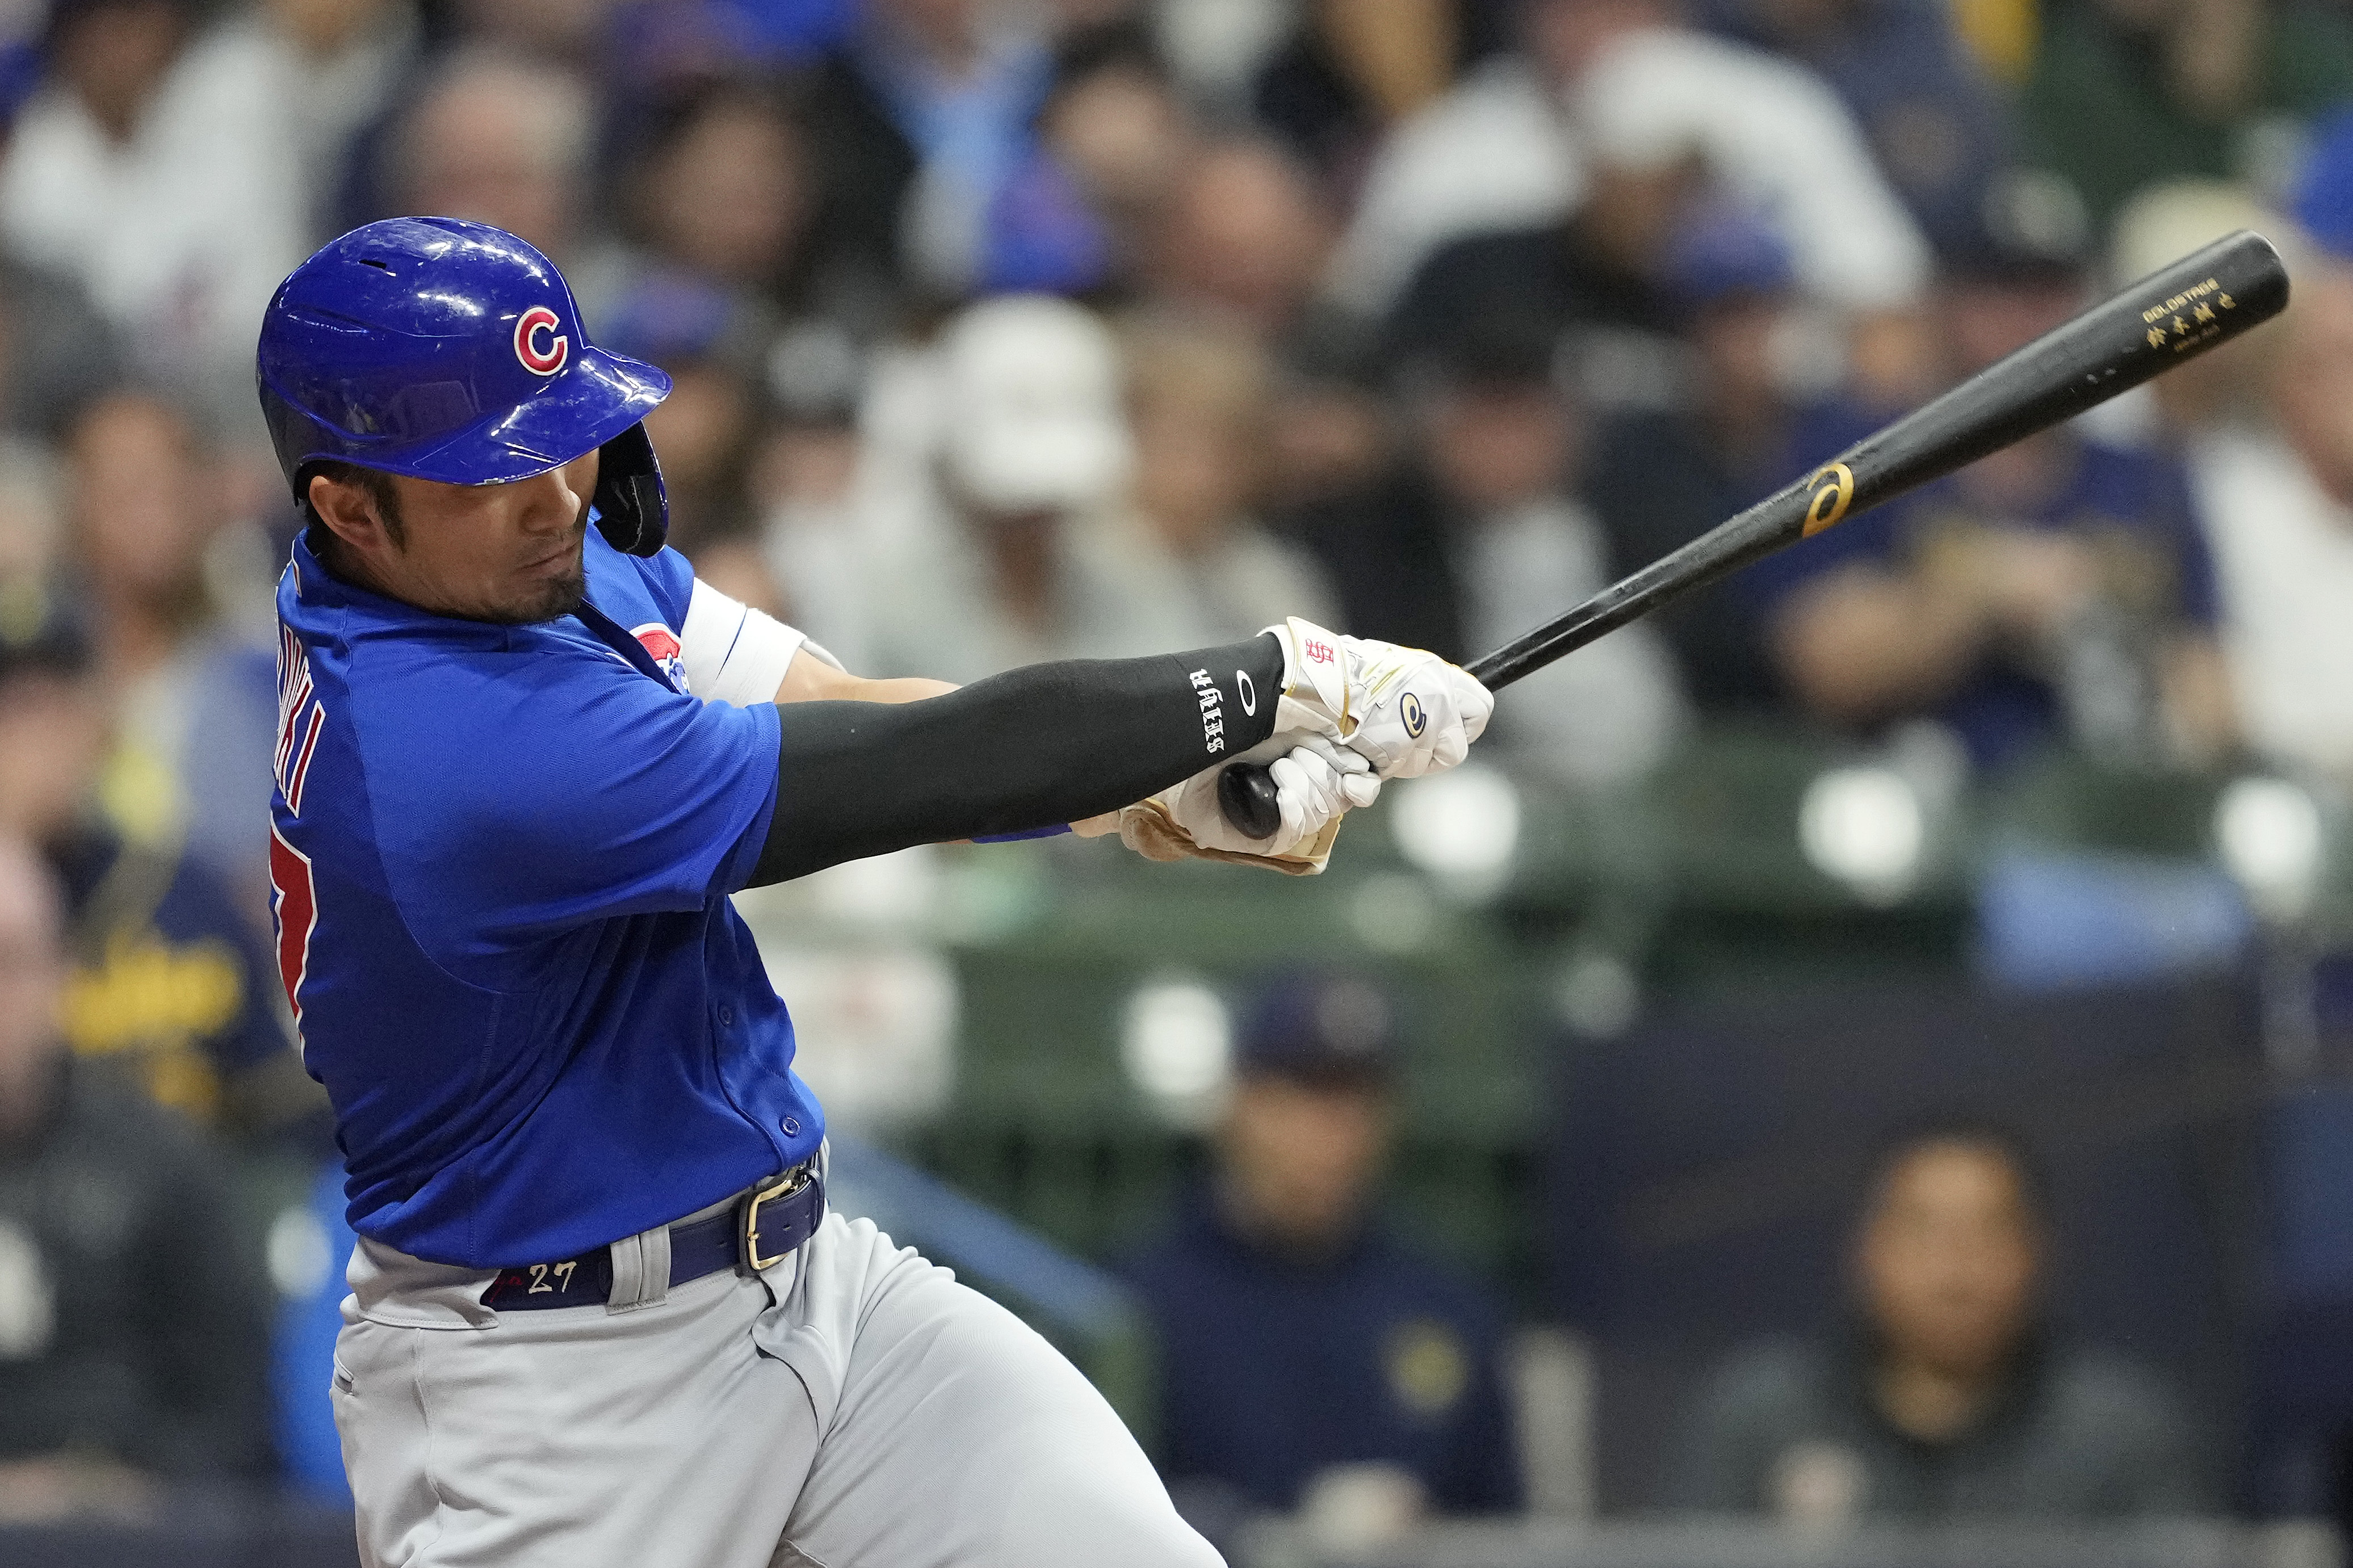 MLB Bullets has the shakes, news from around the league - Bleed Cubbie Blue